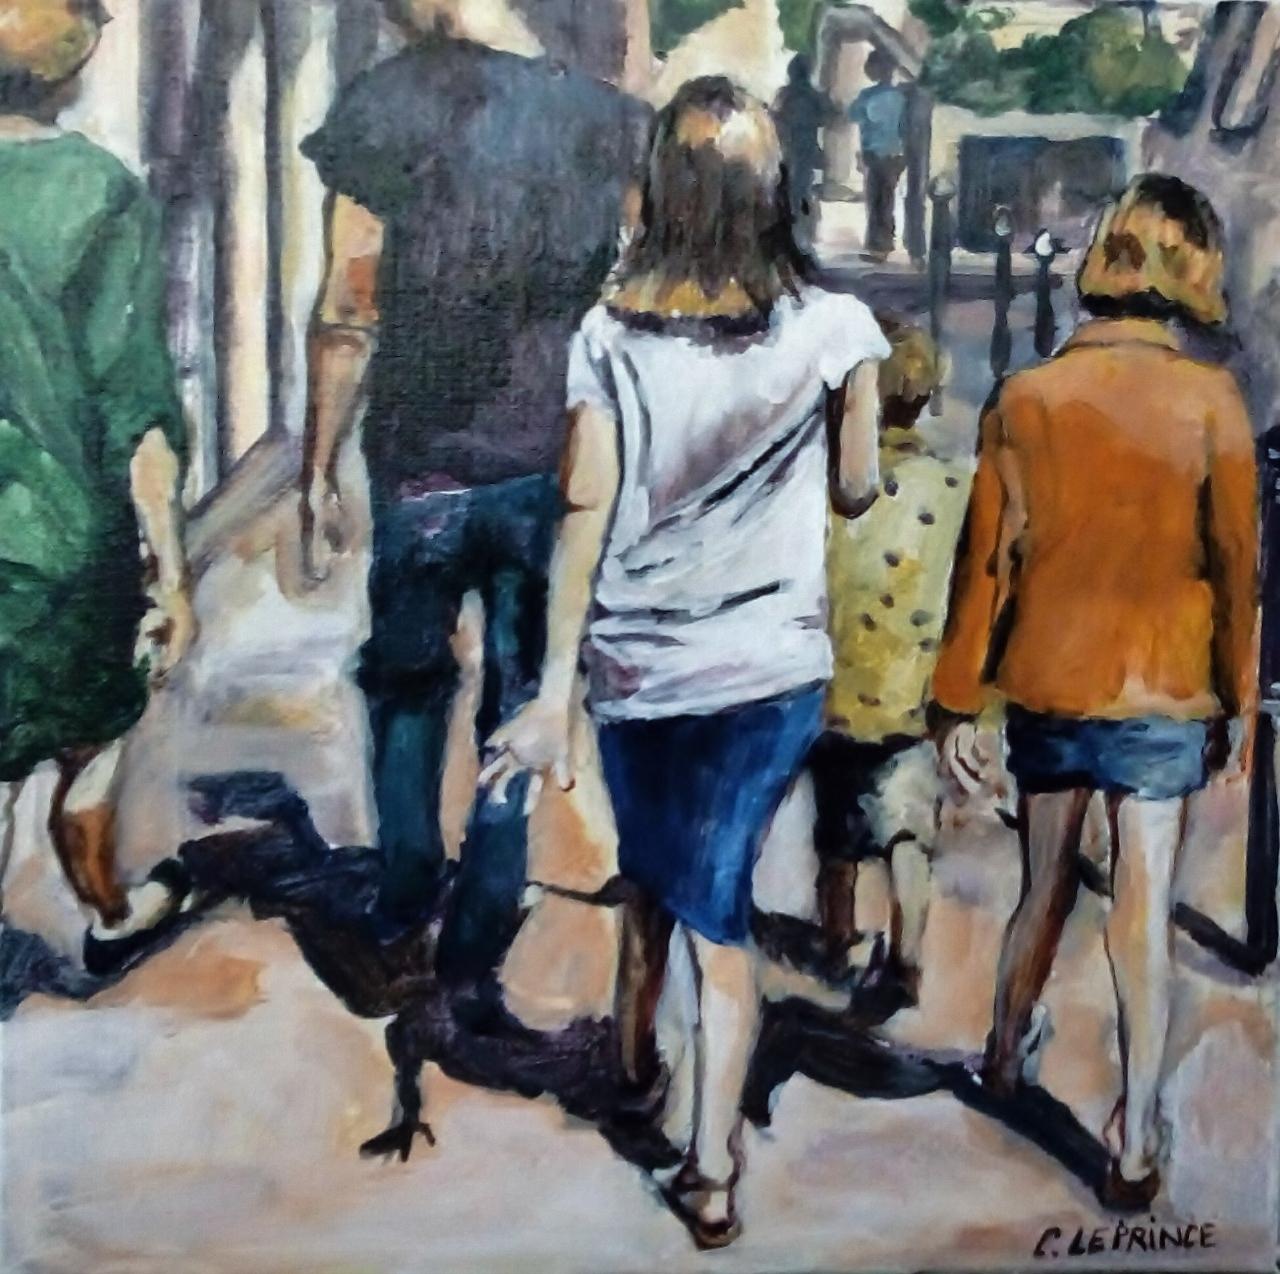 Acrylic on canvas

Carole Leprince is a French artist born in 1966 who lives & works in Houilles, France. Over the years, her personal photos have been the inspiration for painting. She paints both those close to her and strangers in moving settings